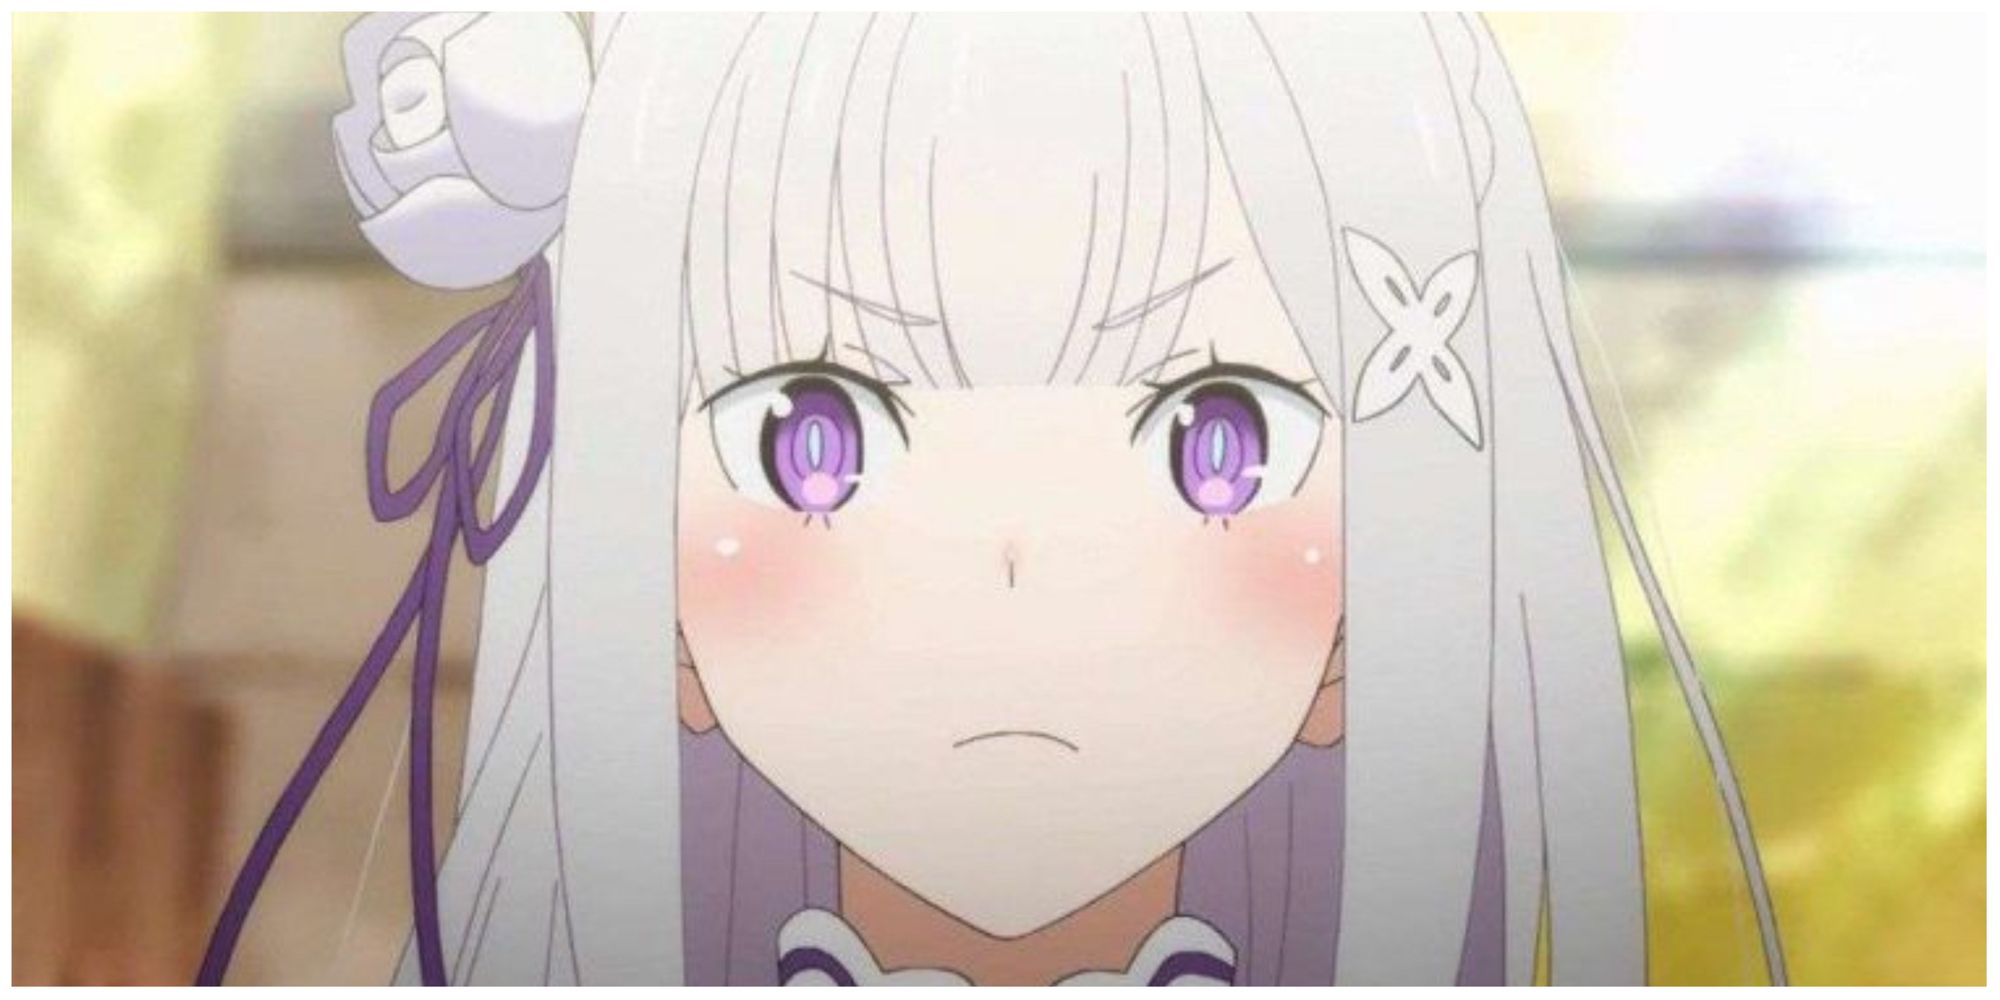 Emilia from Re:zero looking serious